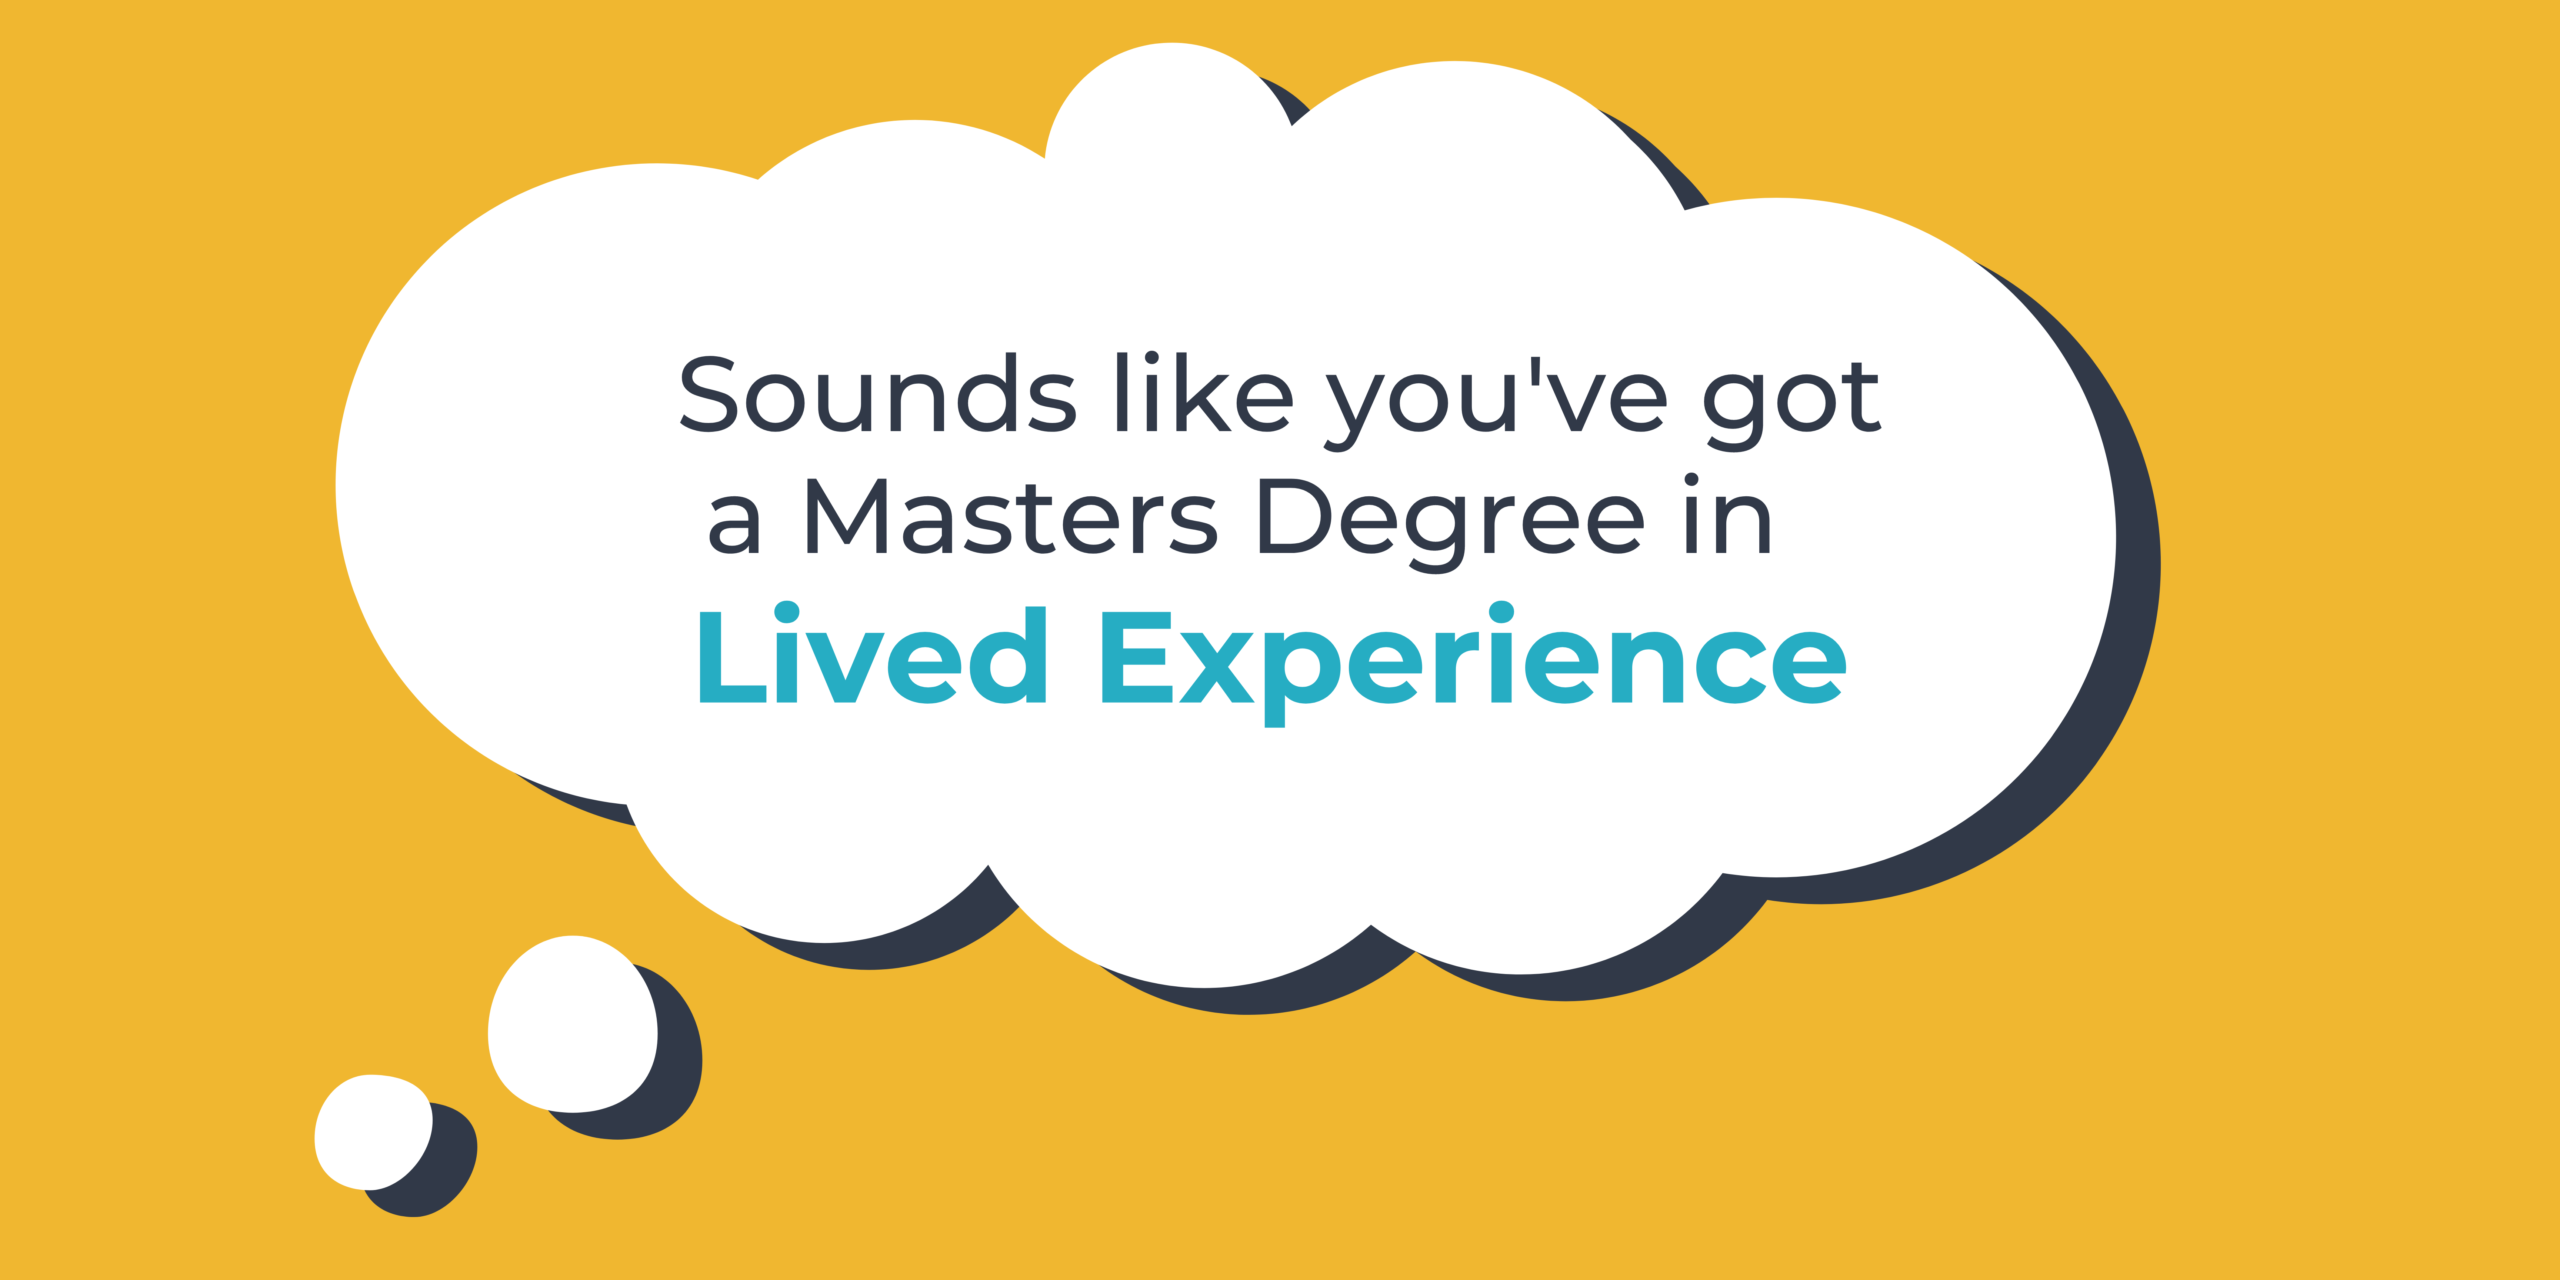 In a speech bubble on a yellow background reads text that says Sounds like you've got a Masters degree in lived experience